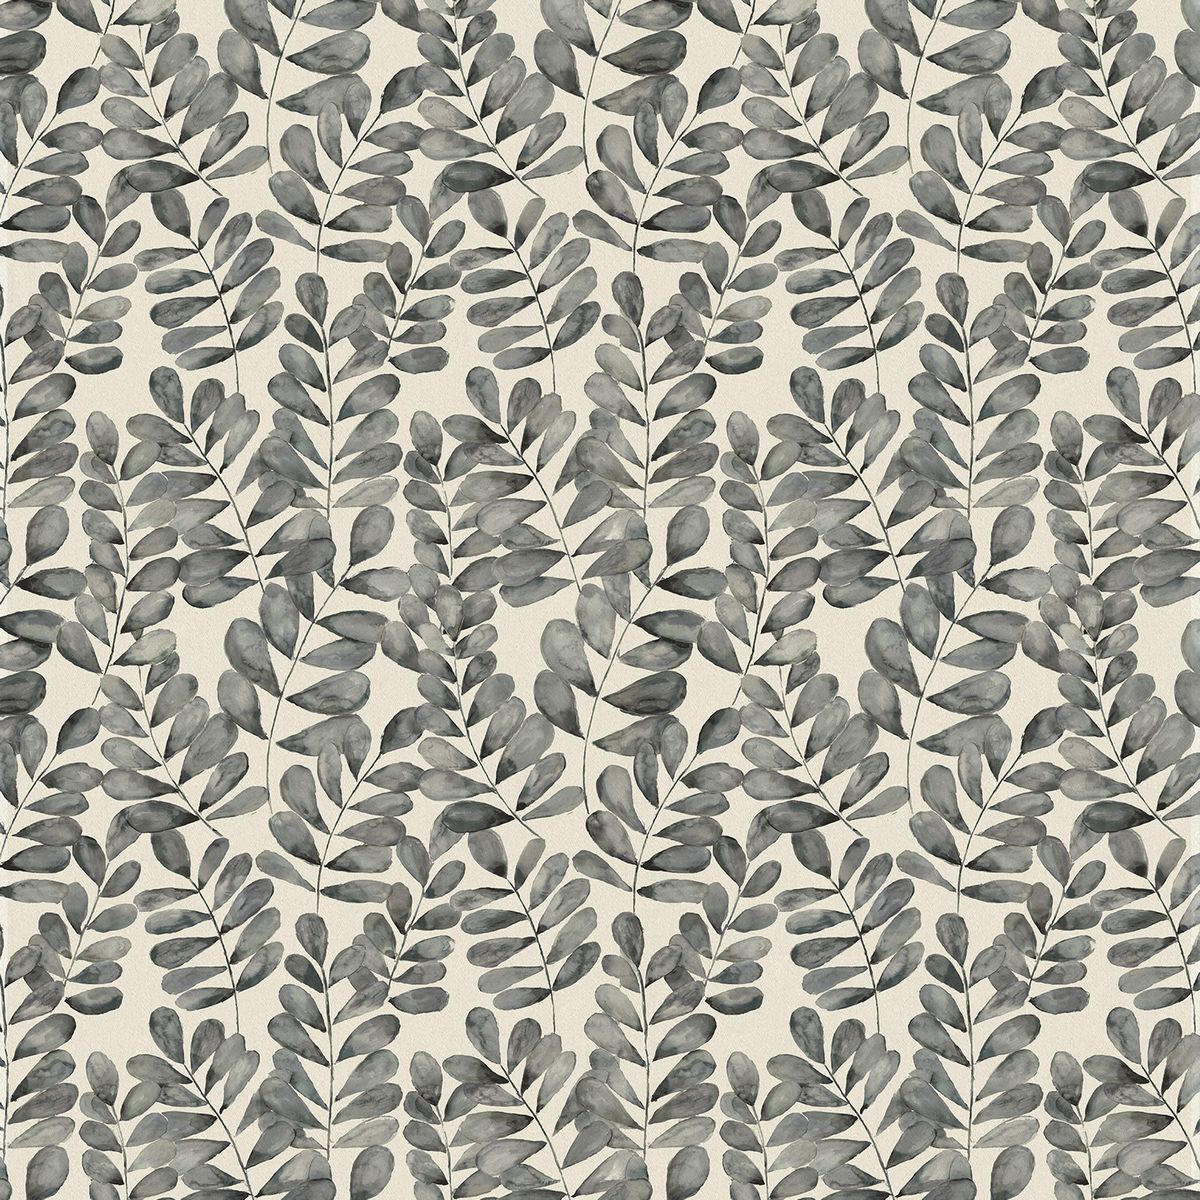 Rowan Willow Fabric by Voyage Maison